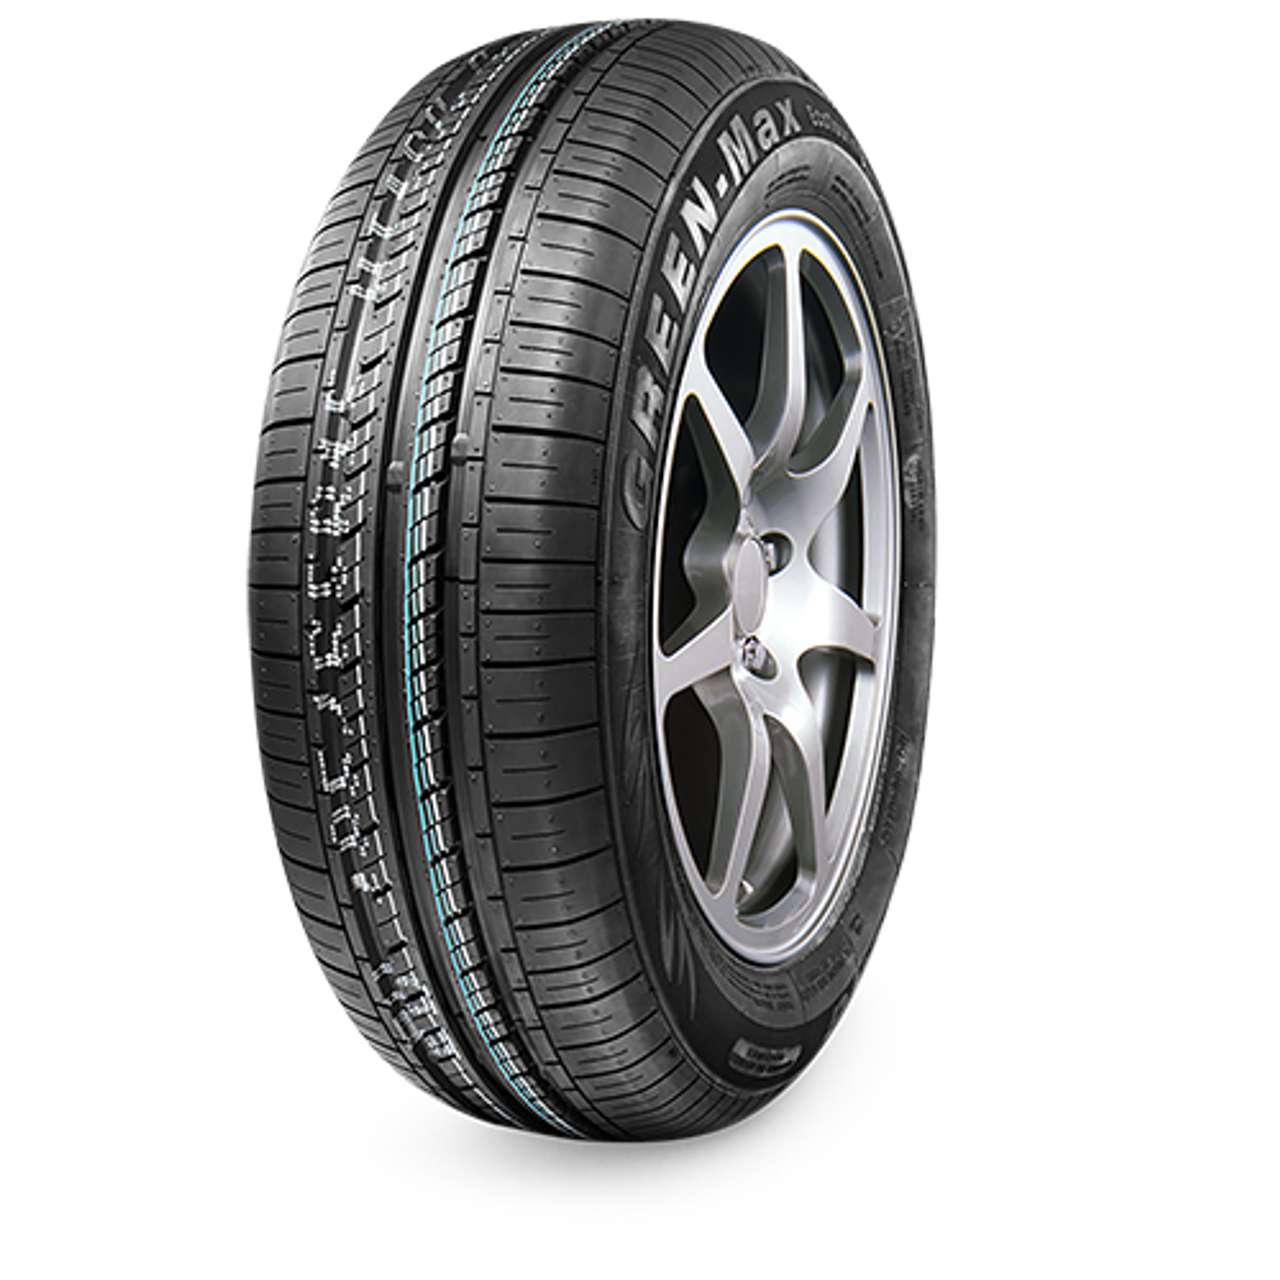 LINGLONG GREEN-MAX ECOTOURING 175/65R14 86T BSW von LINGLONG